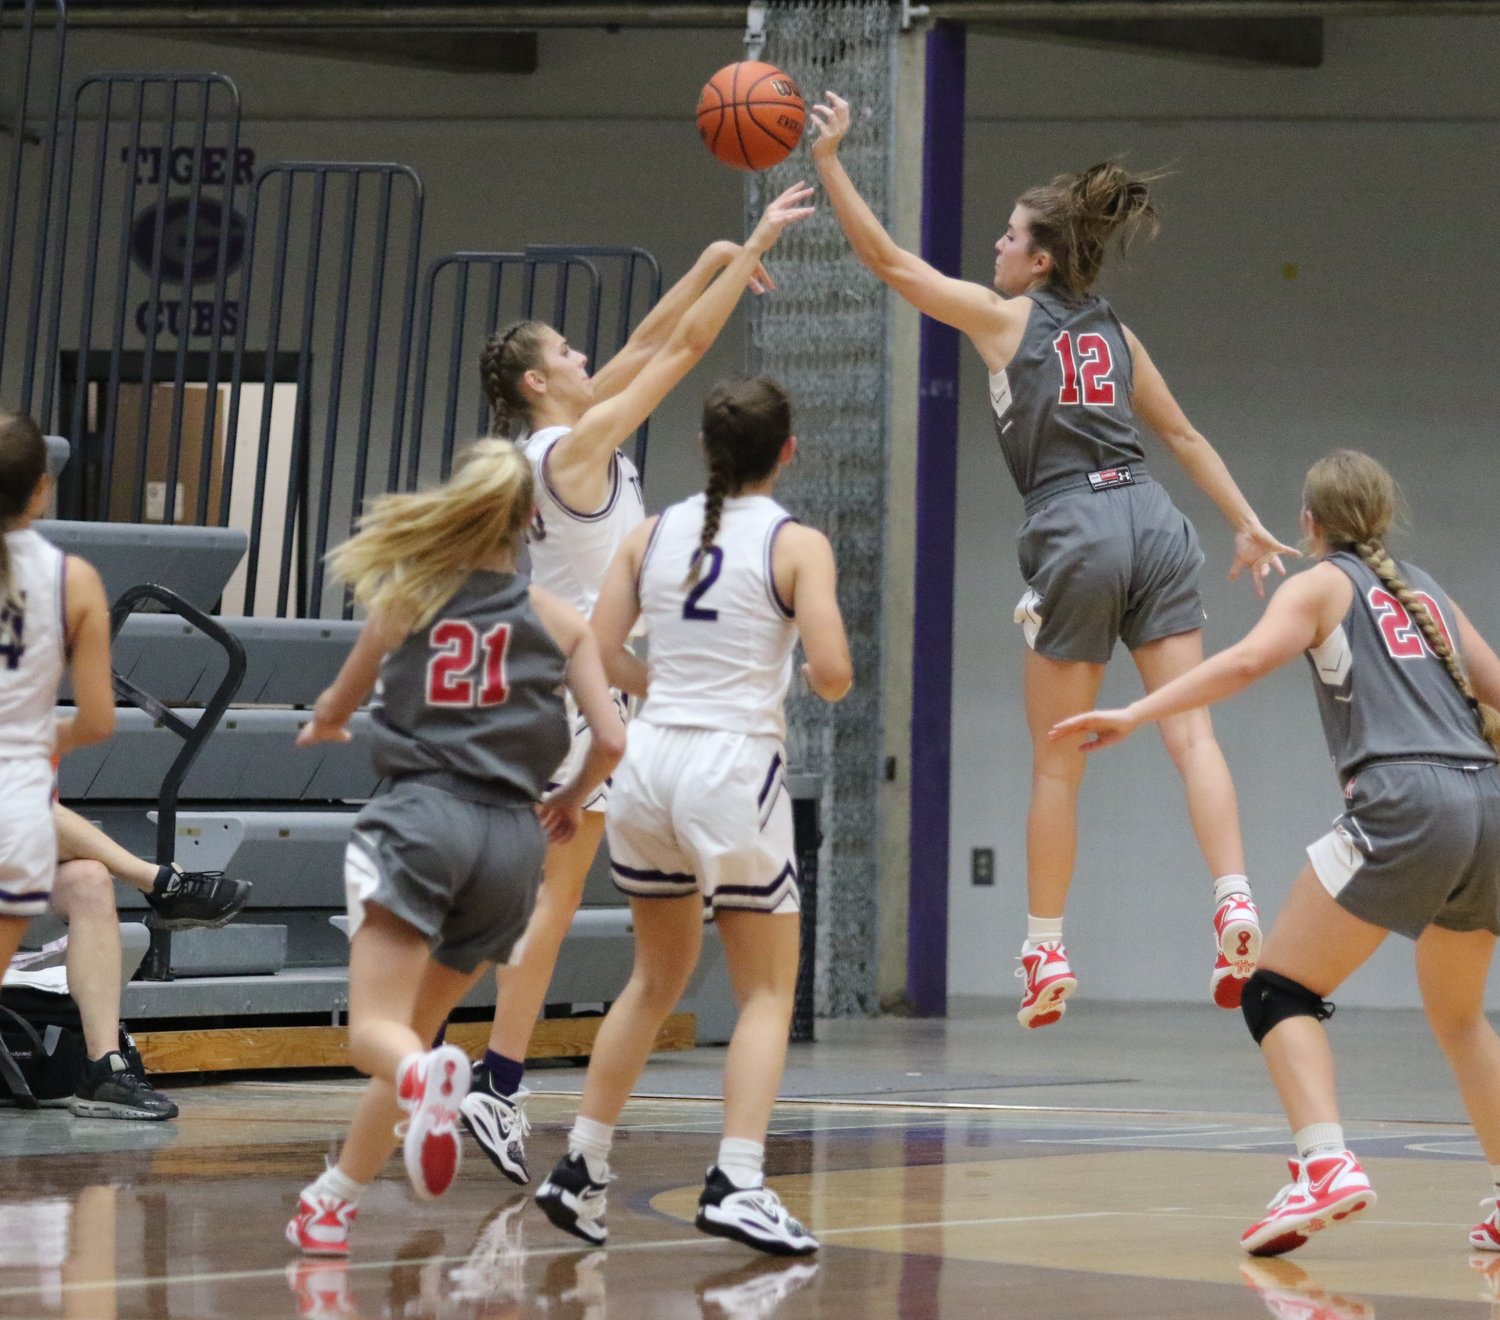 Southmont’s Chelsea Veatch had the game-sealing block for the Mounties as they held on to defeat Greencastle 40-37 in their season opener.